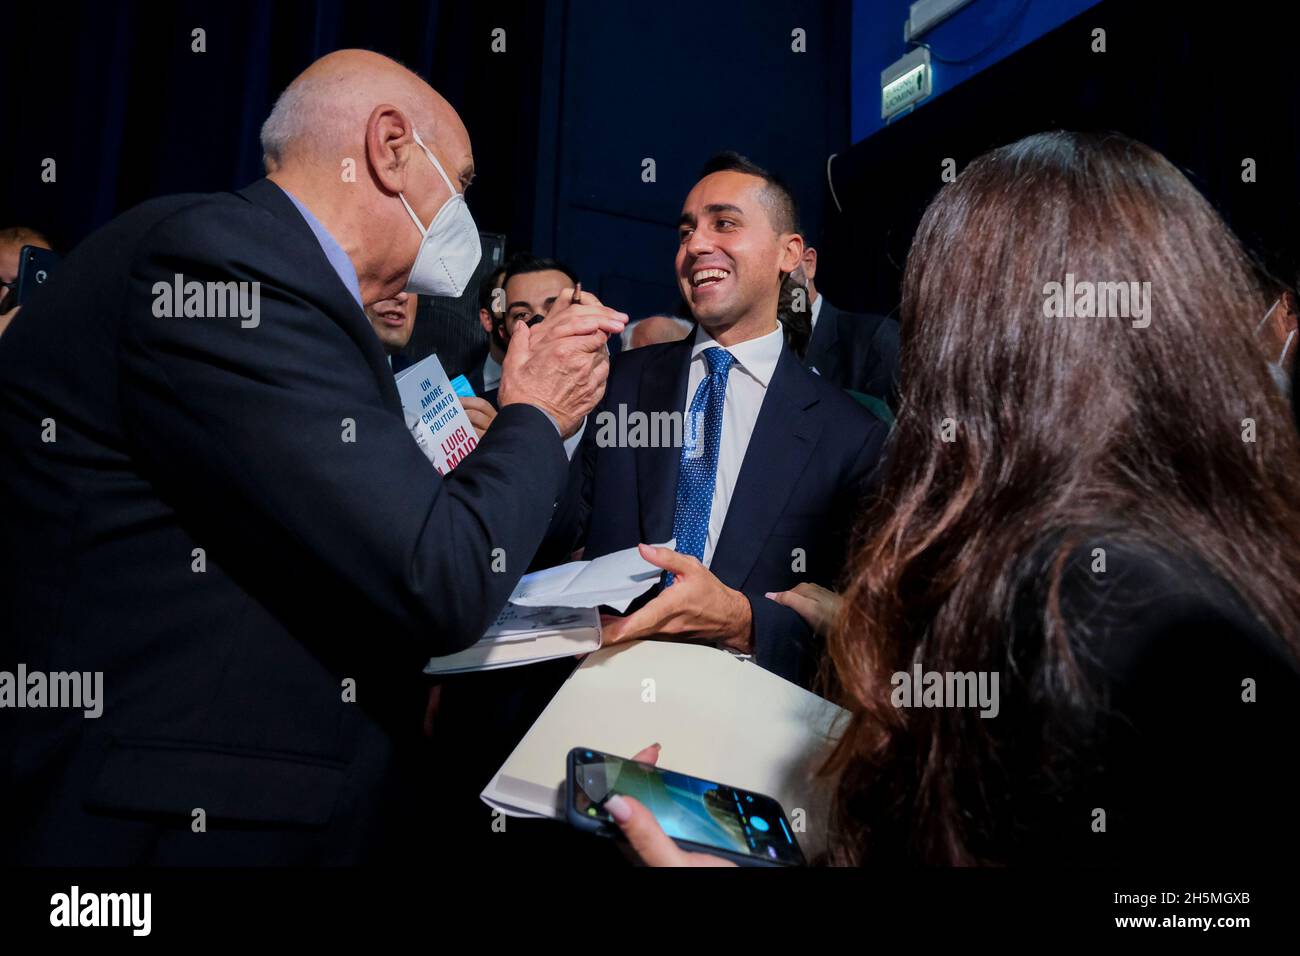 Luigi Di Maio, Minister for Foreign Affairs and International Cooperation during the signing of his book Un Amore Chiamato Politica (A Love Called Politics) on stage at the Cinema Teatro Gloria in Pomigliano d'Arco, his hometown. Stock Photo